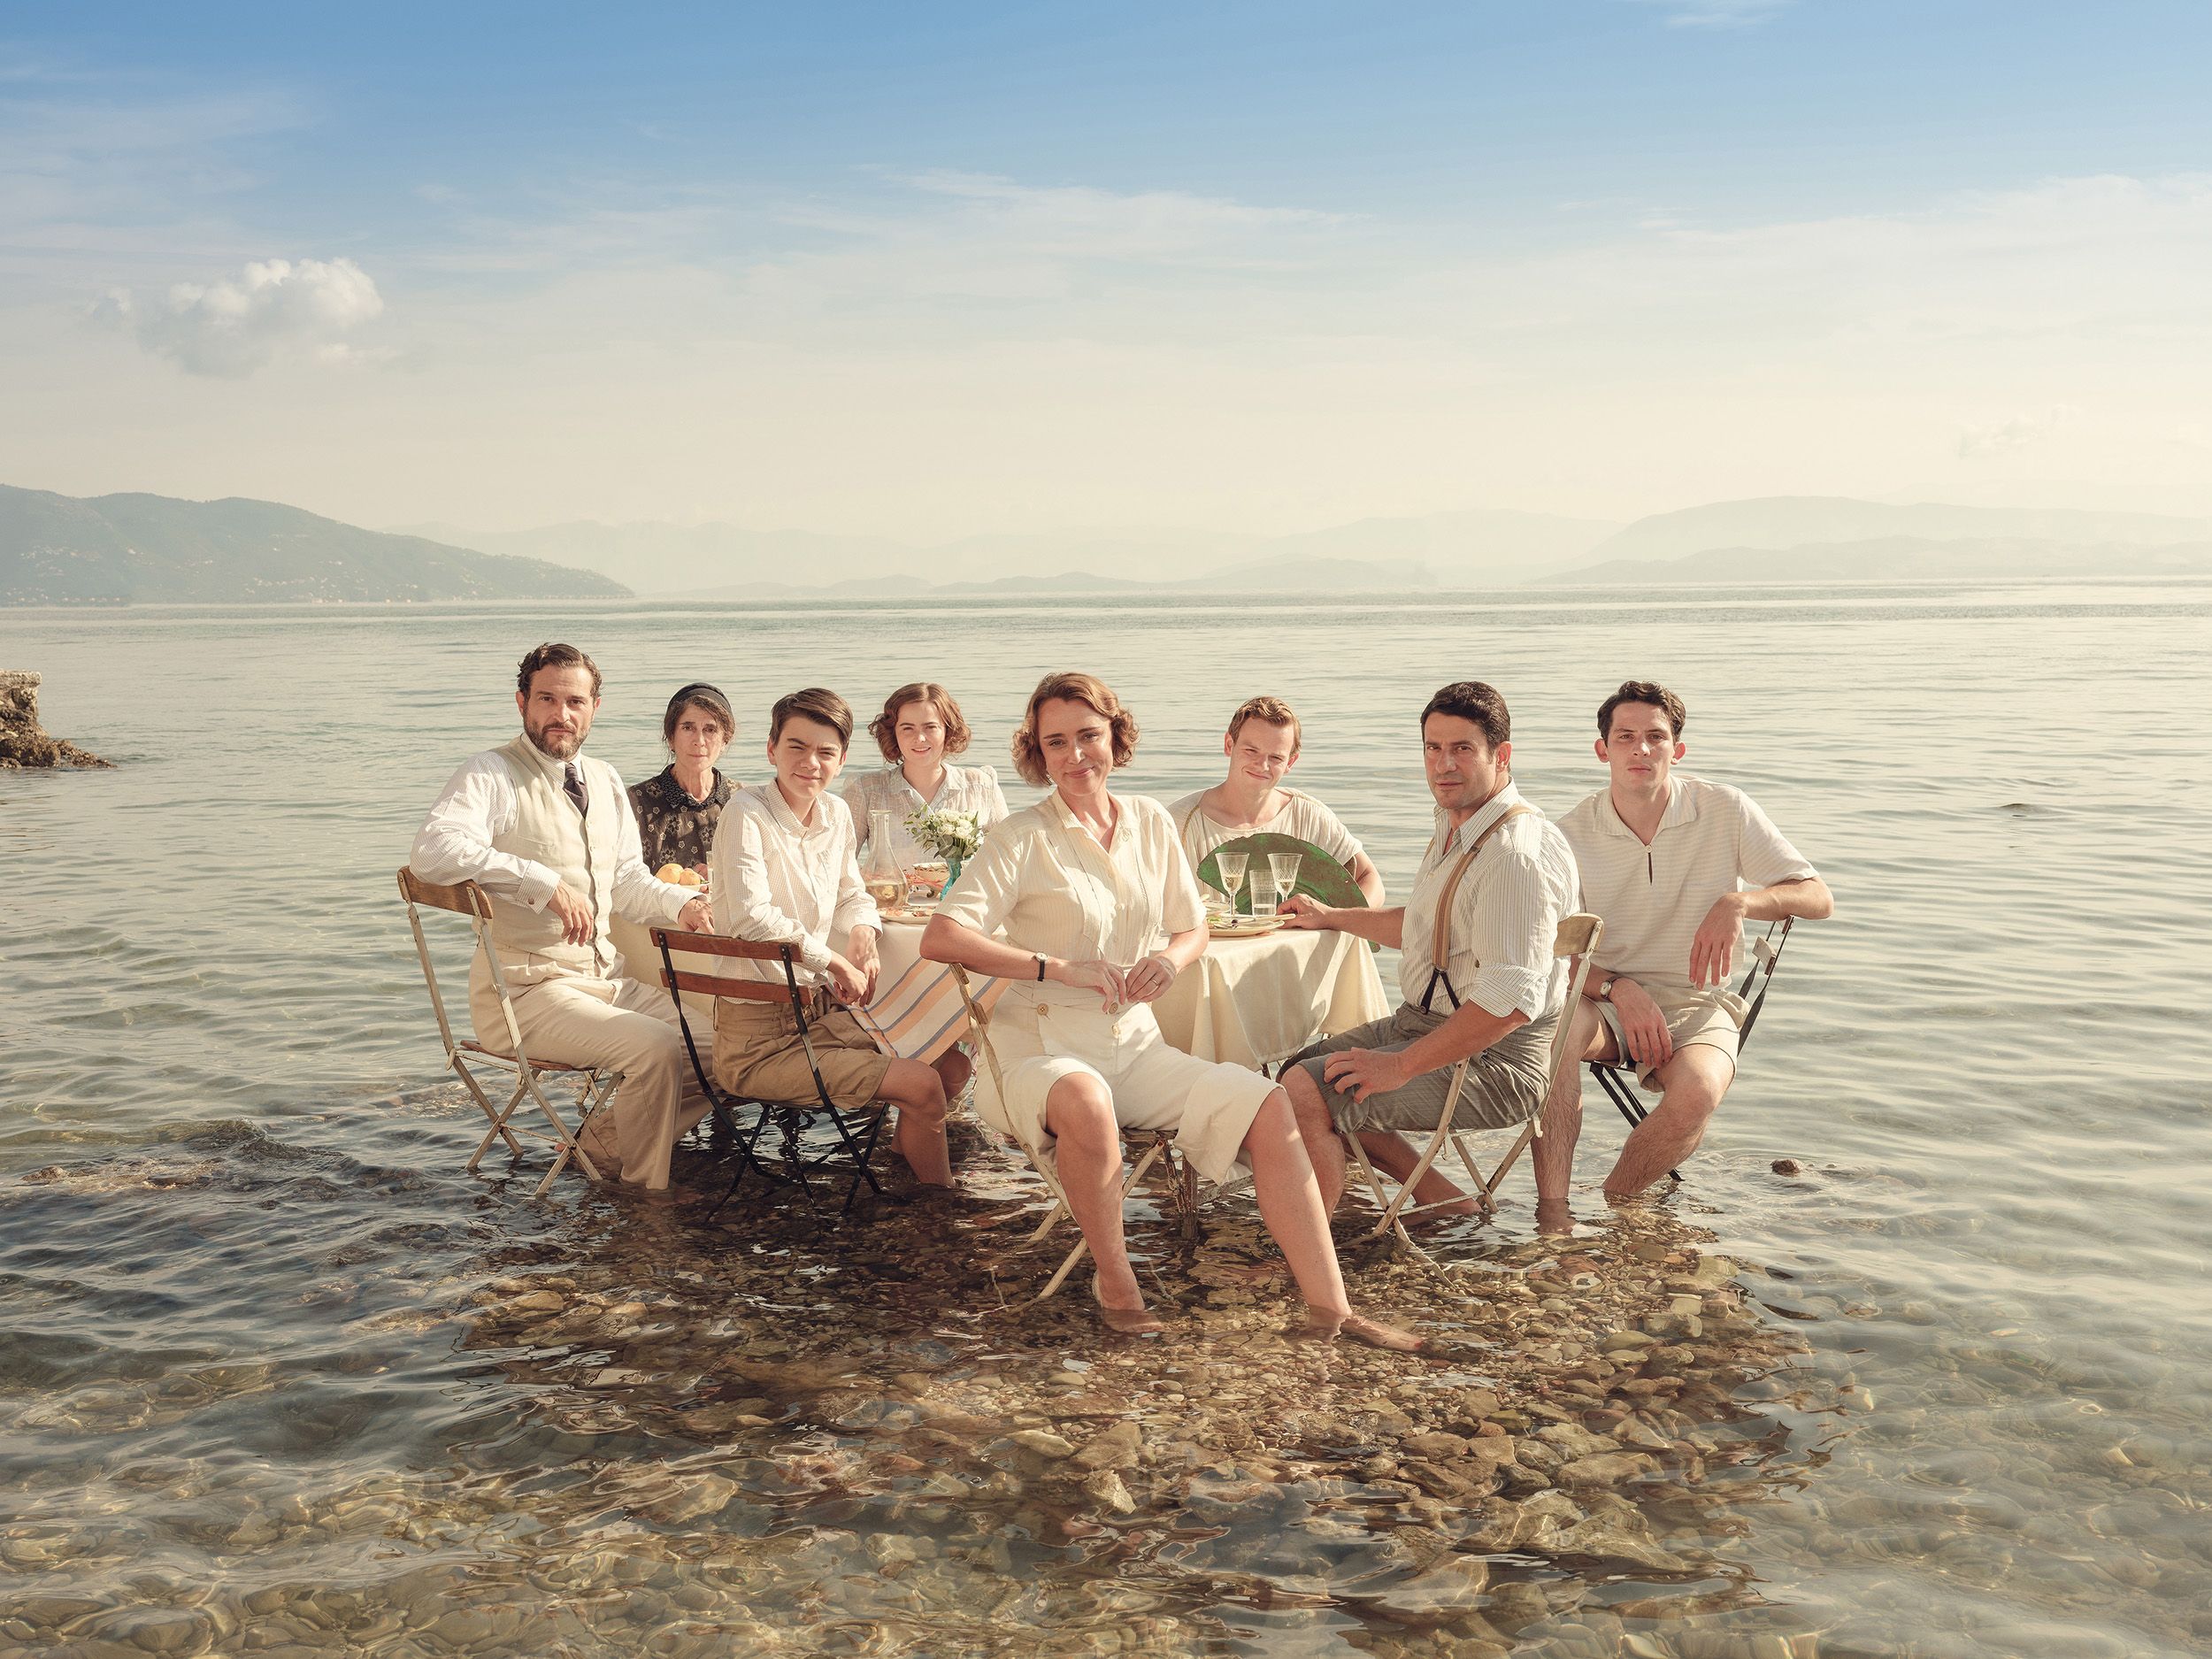 <p>After four hit seasons, <em><a href="https://www.goodhousekeeping.com/uk/lifestyle/a27880831/itv-the-durrells-revival-already-being-developed/">The Durrells</a></em> ended in 2019, leaving us desperate for more of the family’s adventures on the stunning Greek island of Corfu. </p><p><a class="body-btn-link" href="https://www.goodhousekeepingholidays.com/tours/greece-the-real-corfu-of-the-durrells">SEE THE DURRELLS' CORFU WITH GH</a></p><p>The show succeeded in bringing Gerald Durrell’s beloved book <em>My Family and other Animals</em> and its two sequels to life for fans old and new, as well as reminding us of the beauty of Corfu, where <em>The Durrells</em> is filmed.</p><p>To help you relive the adventures of the comedy-drama, next May, you can <a href="https://www.goodhousekeepingholidays.com/tours/greece-the-real-corfu-of-the-durrells">join a <em>Durrells</em>-themed holiday to Corfu</a> where you’ll be hosted by Gerald’s wife Lee Durrell. She'll give exclusive talks and show you around some of the places you’ve seen on the small screen, including Corfu Town, Sinarades and Agios Stefanos. </p><p>You’ll also go on an excursion to UNESCO-listed Butrint, in Albania. To find out a bit more about some of the filming locations from <em>The Durrells </em>that you can visit, read on.</p>